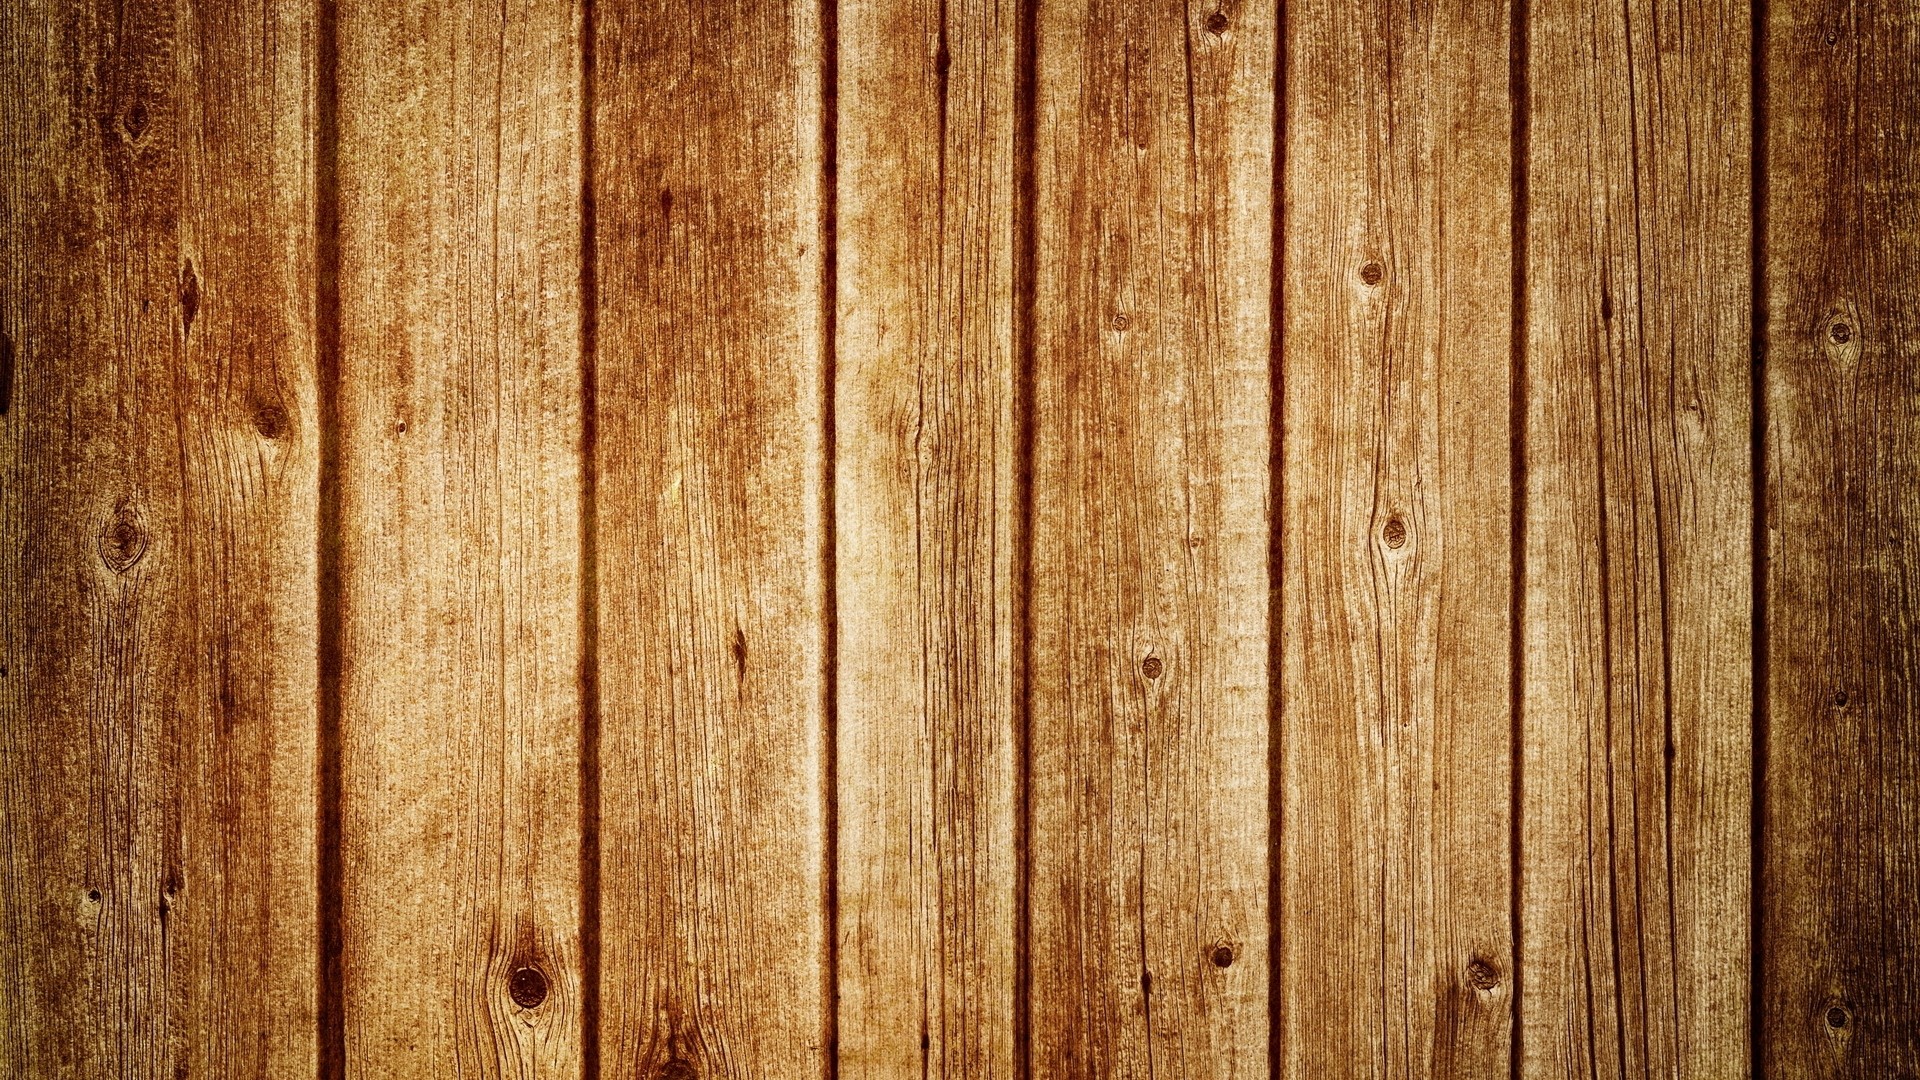 1920x1080 boards, wooden, surface